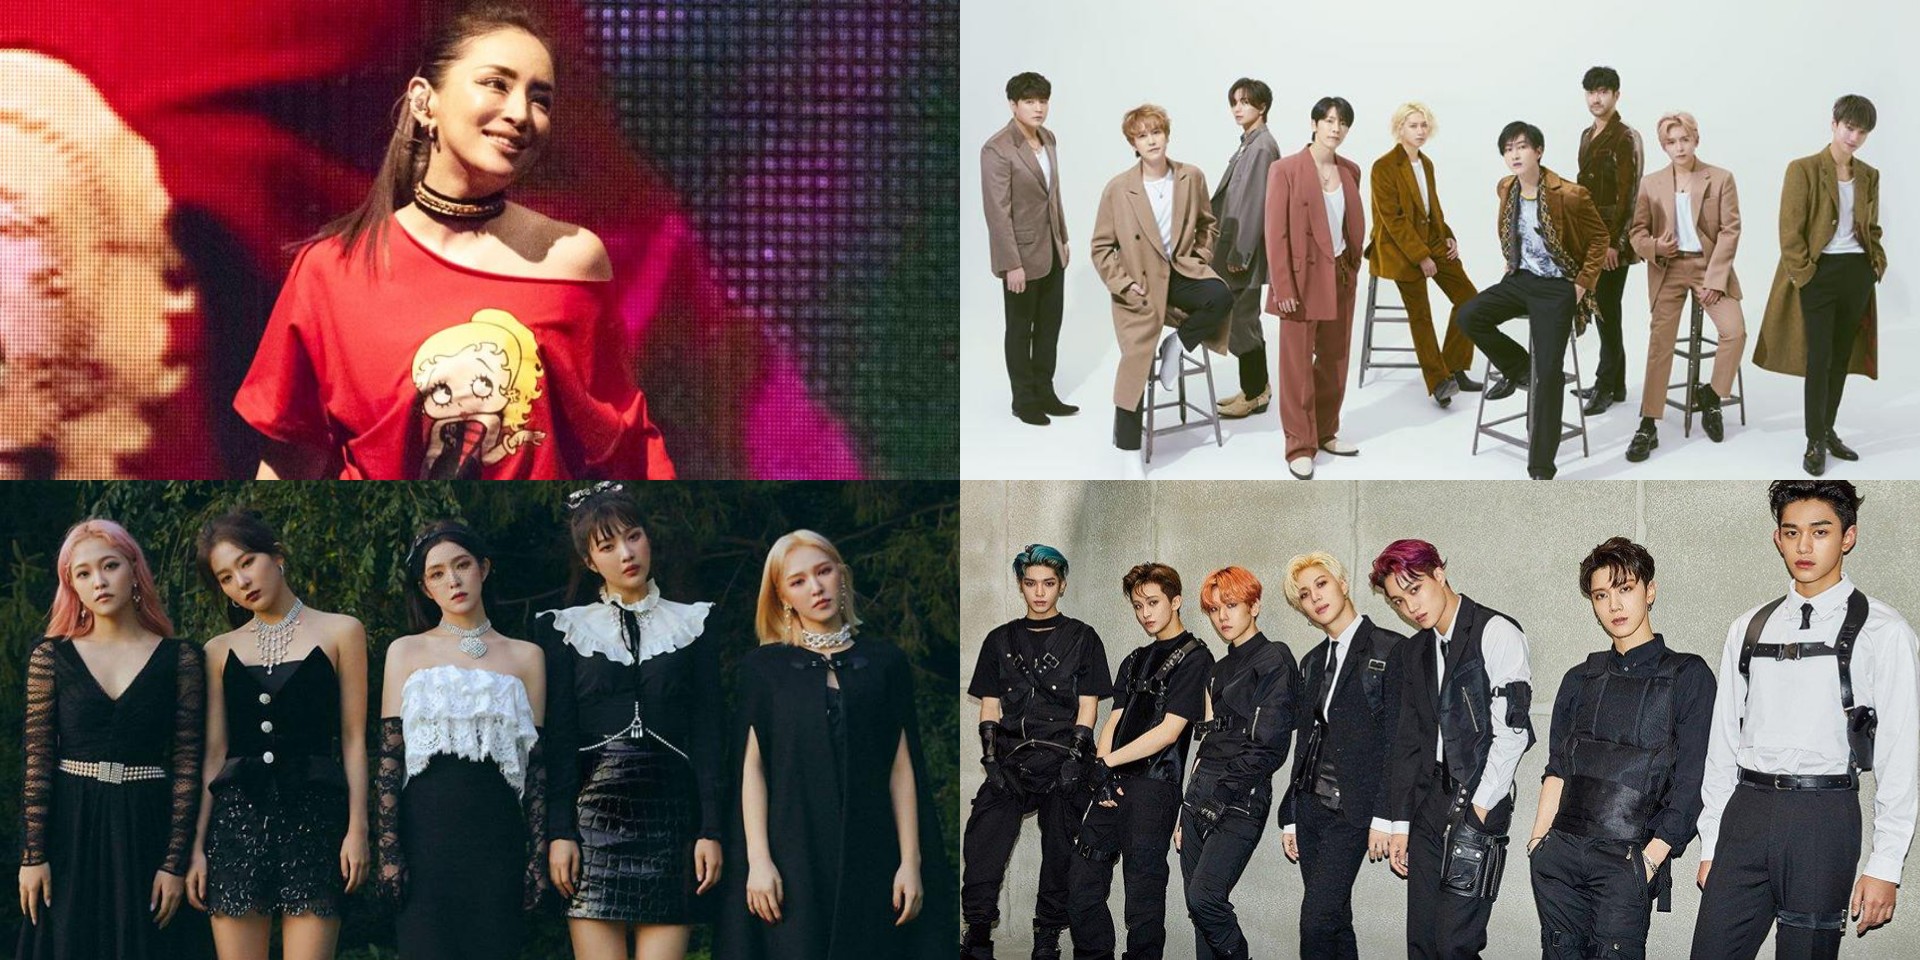 Japanese concert series a-nation announces online show lineup: Super Junior, Ayumi Hamasaki, Red Velvet, and more confirmed